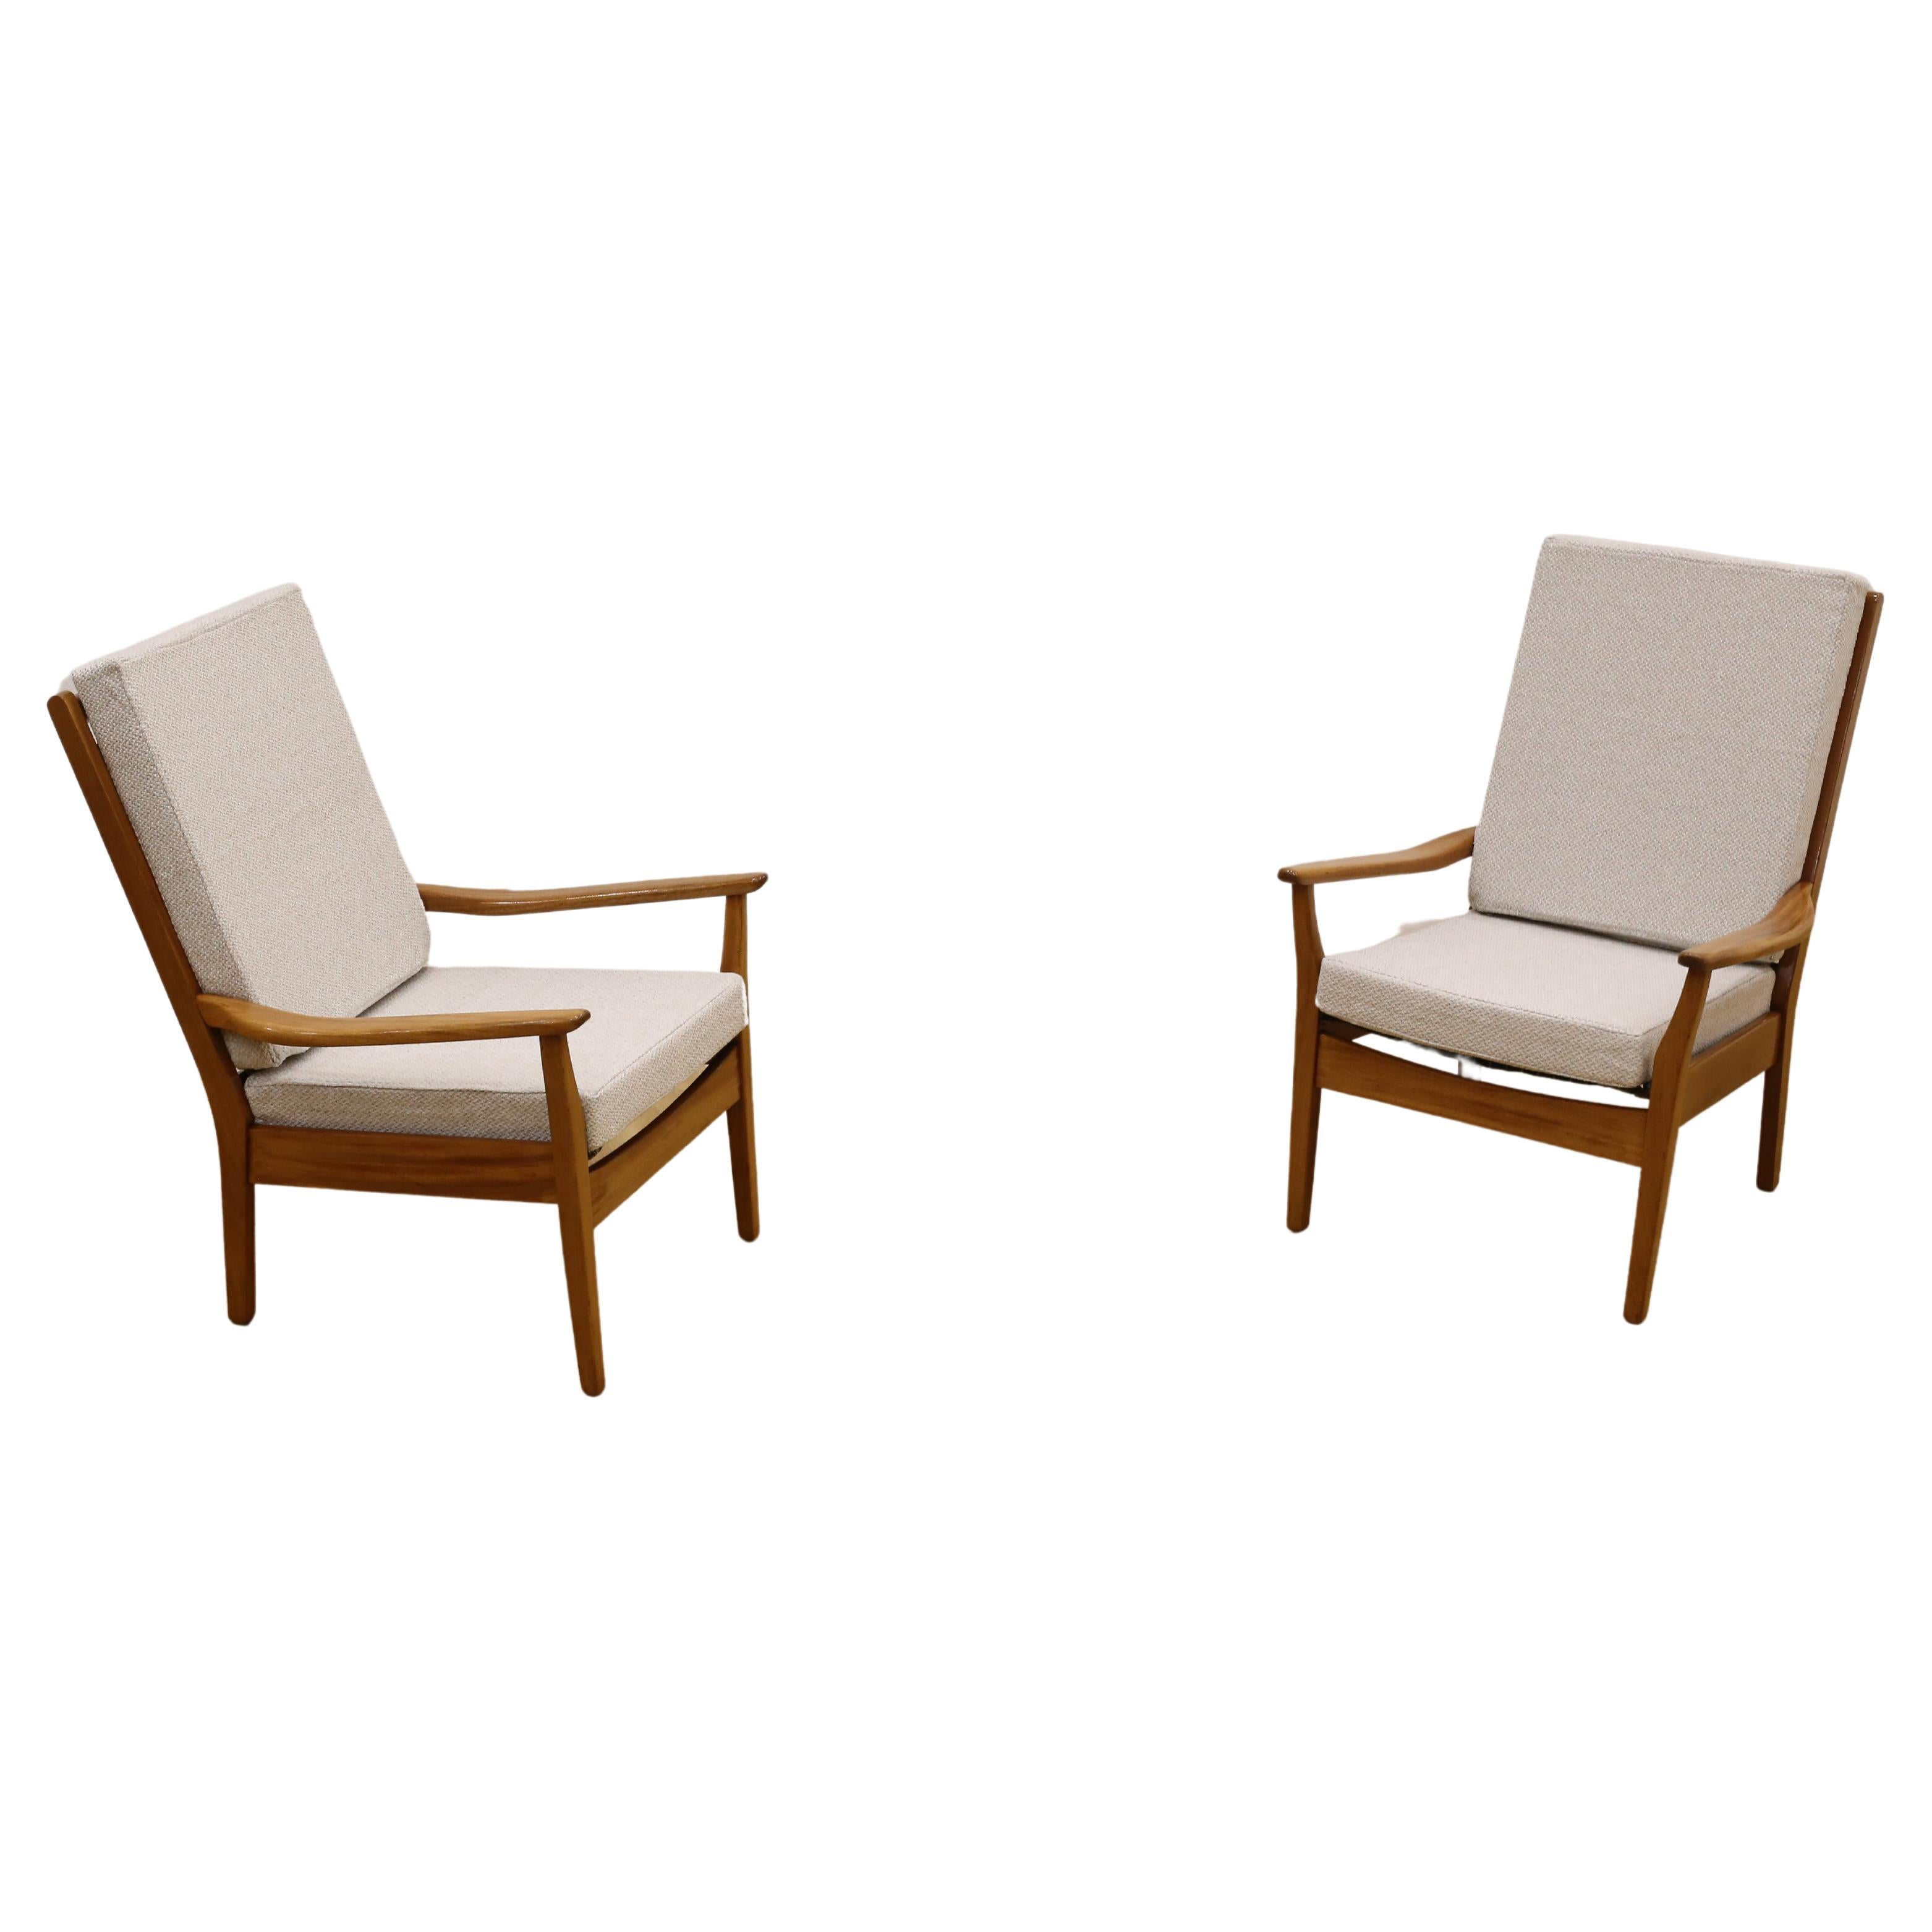 Mid Century Don princess armchairs x 2. New upholstery For Sale